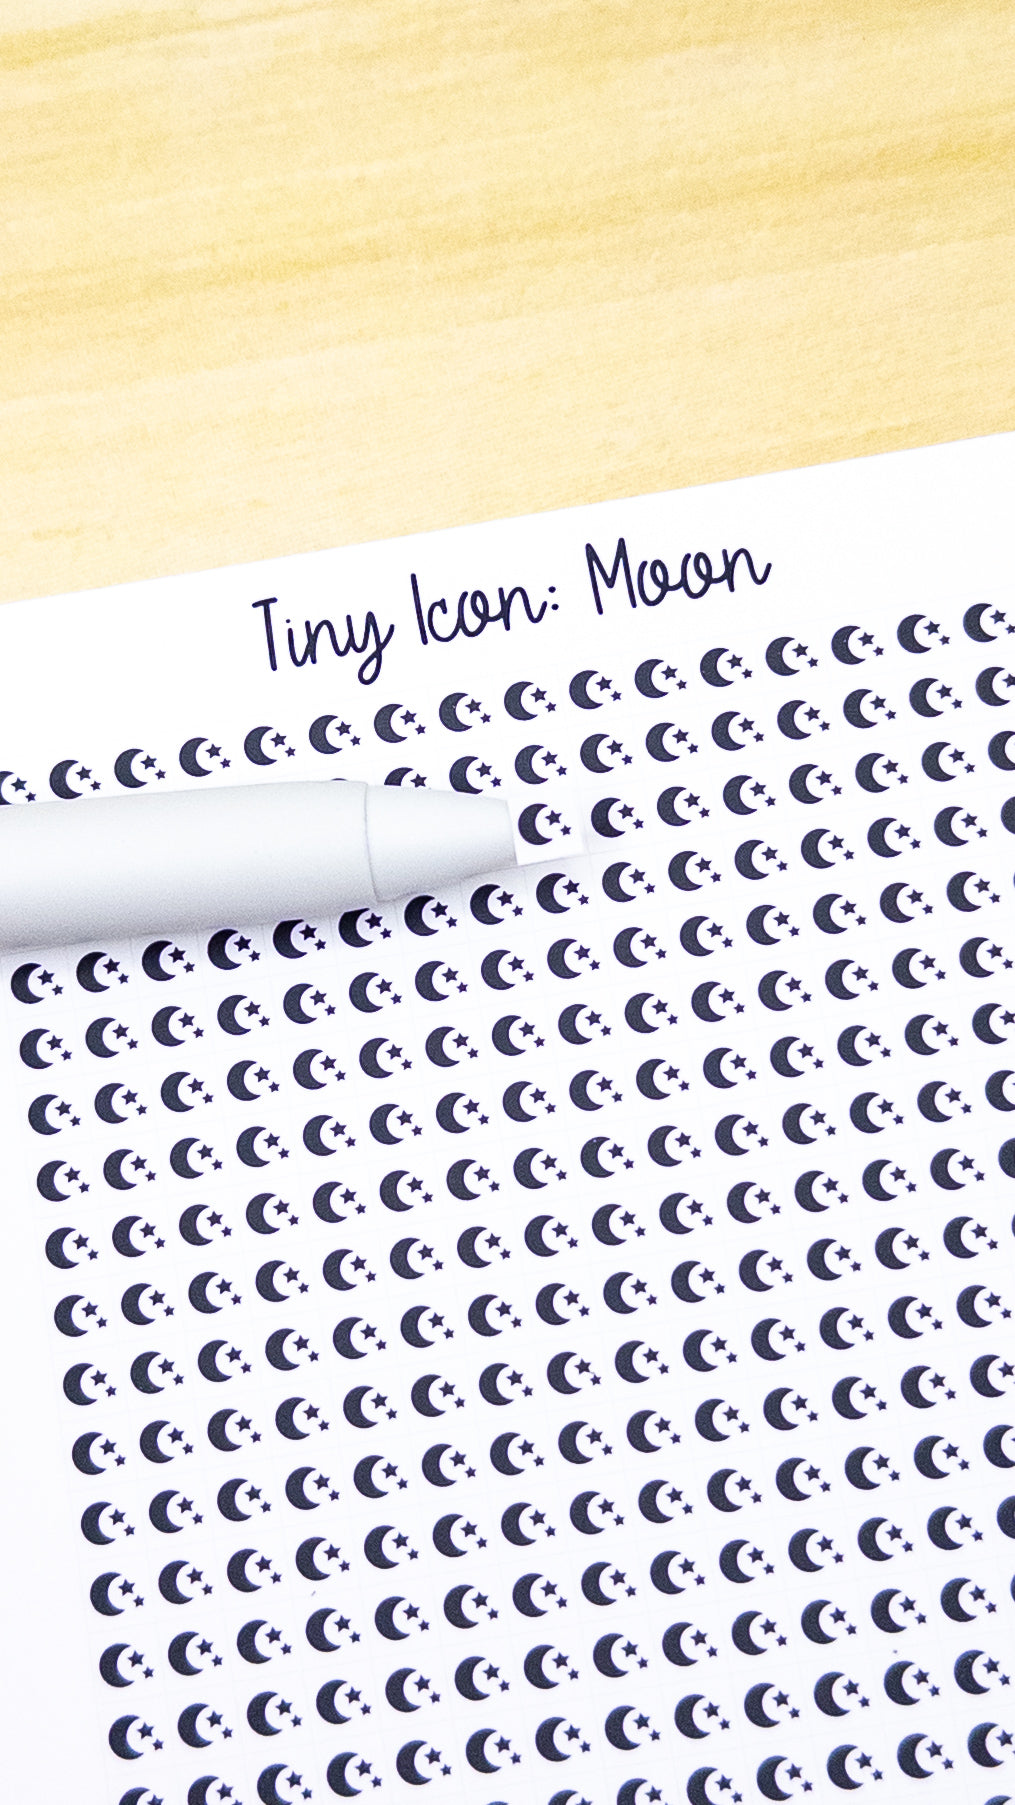 Tiny Icon: Moon Doodle Functional Sticker Sheet 5 mm Square Night Stars Bedtime Nighttime Bujo Line Art Style